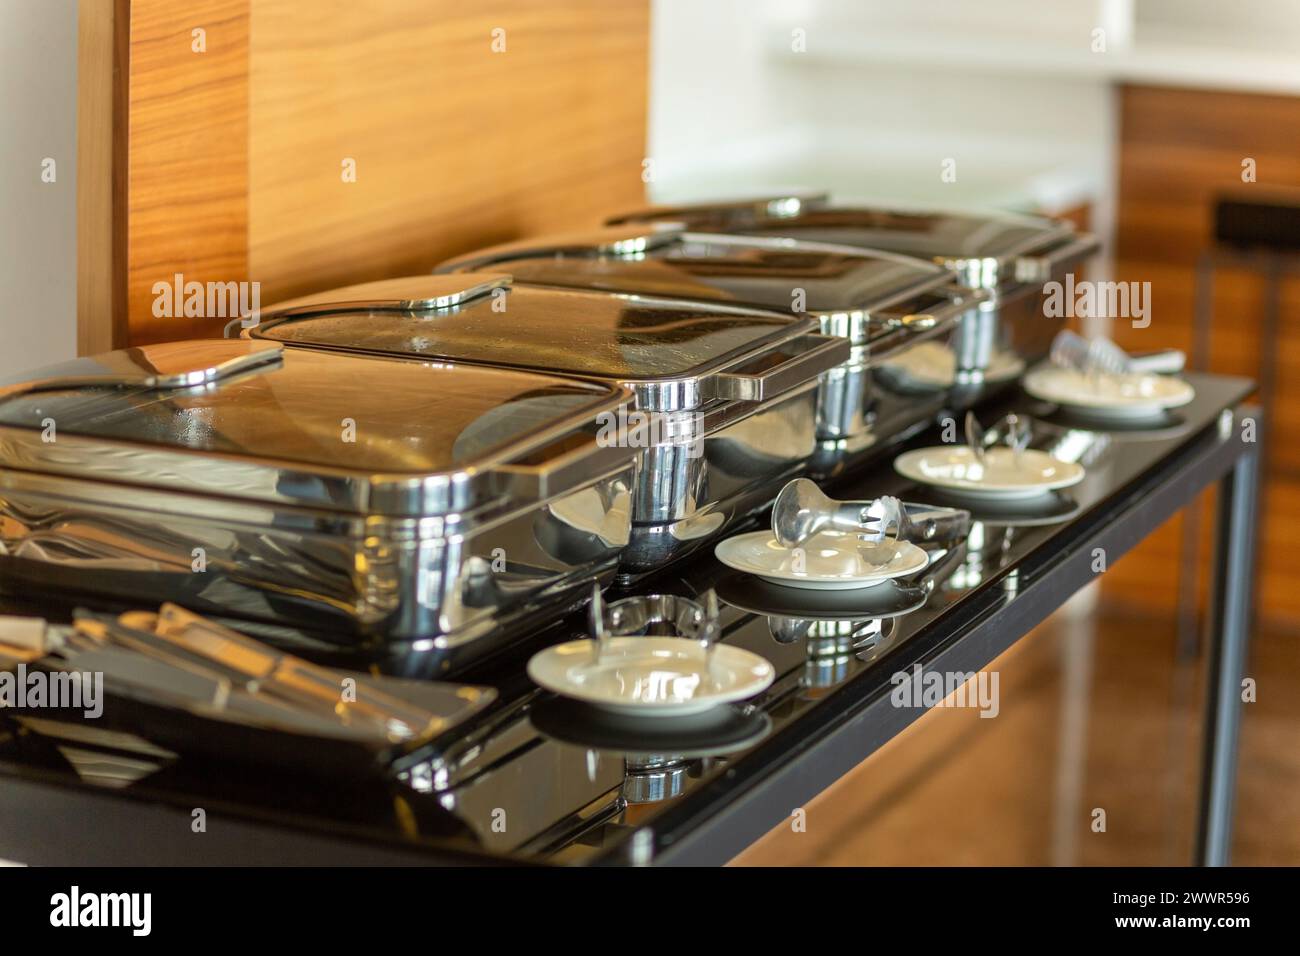 Row of closed chafing dishes at party banquet hall. Marmites ready for service made of stainless steel at buffet. Stock Photo